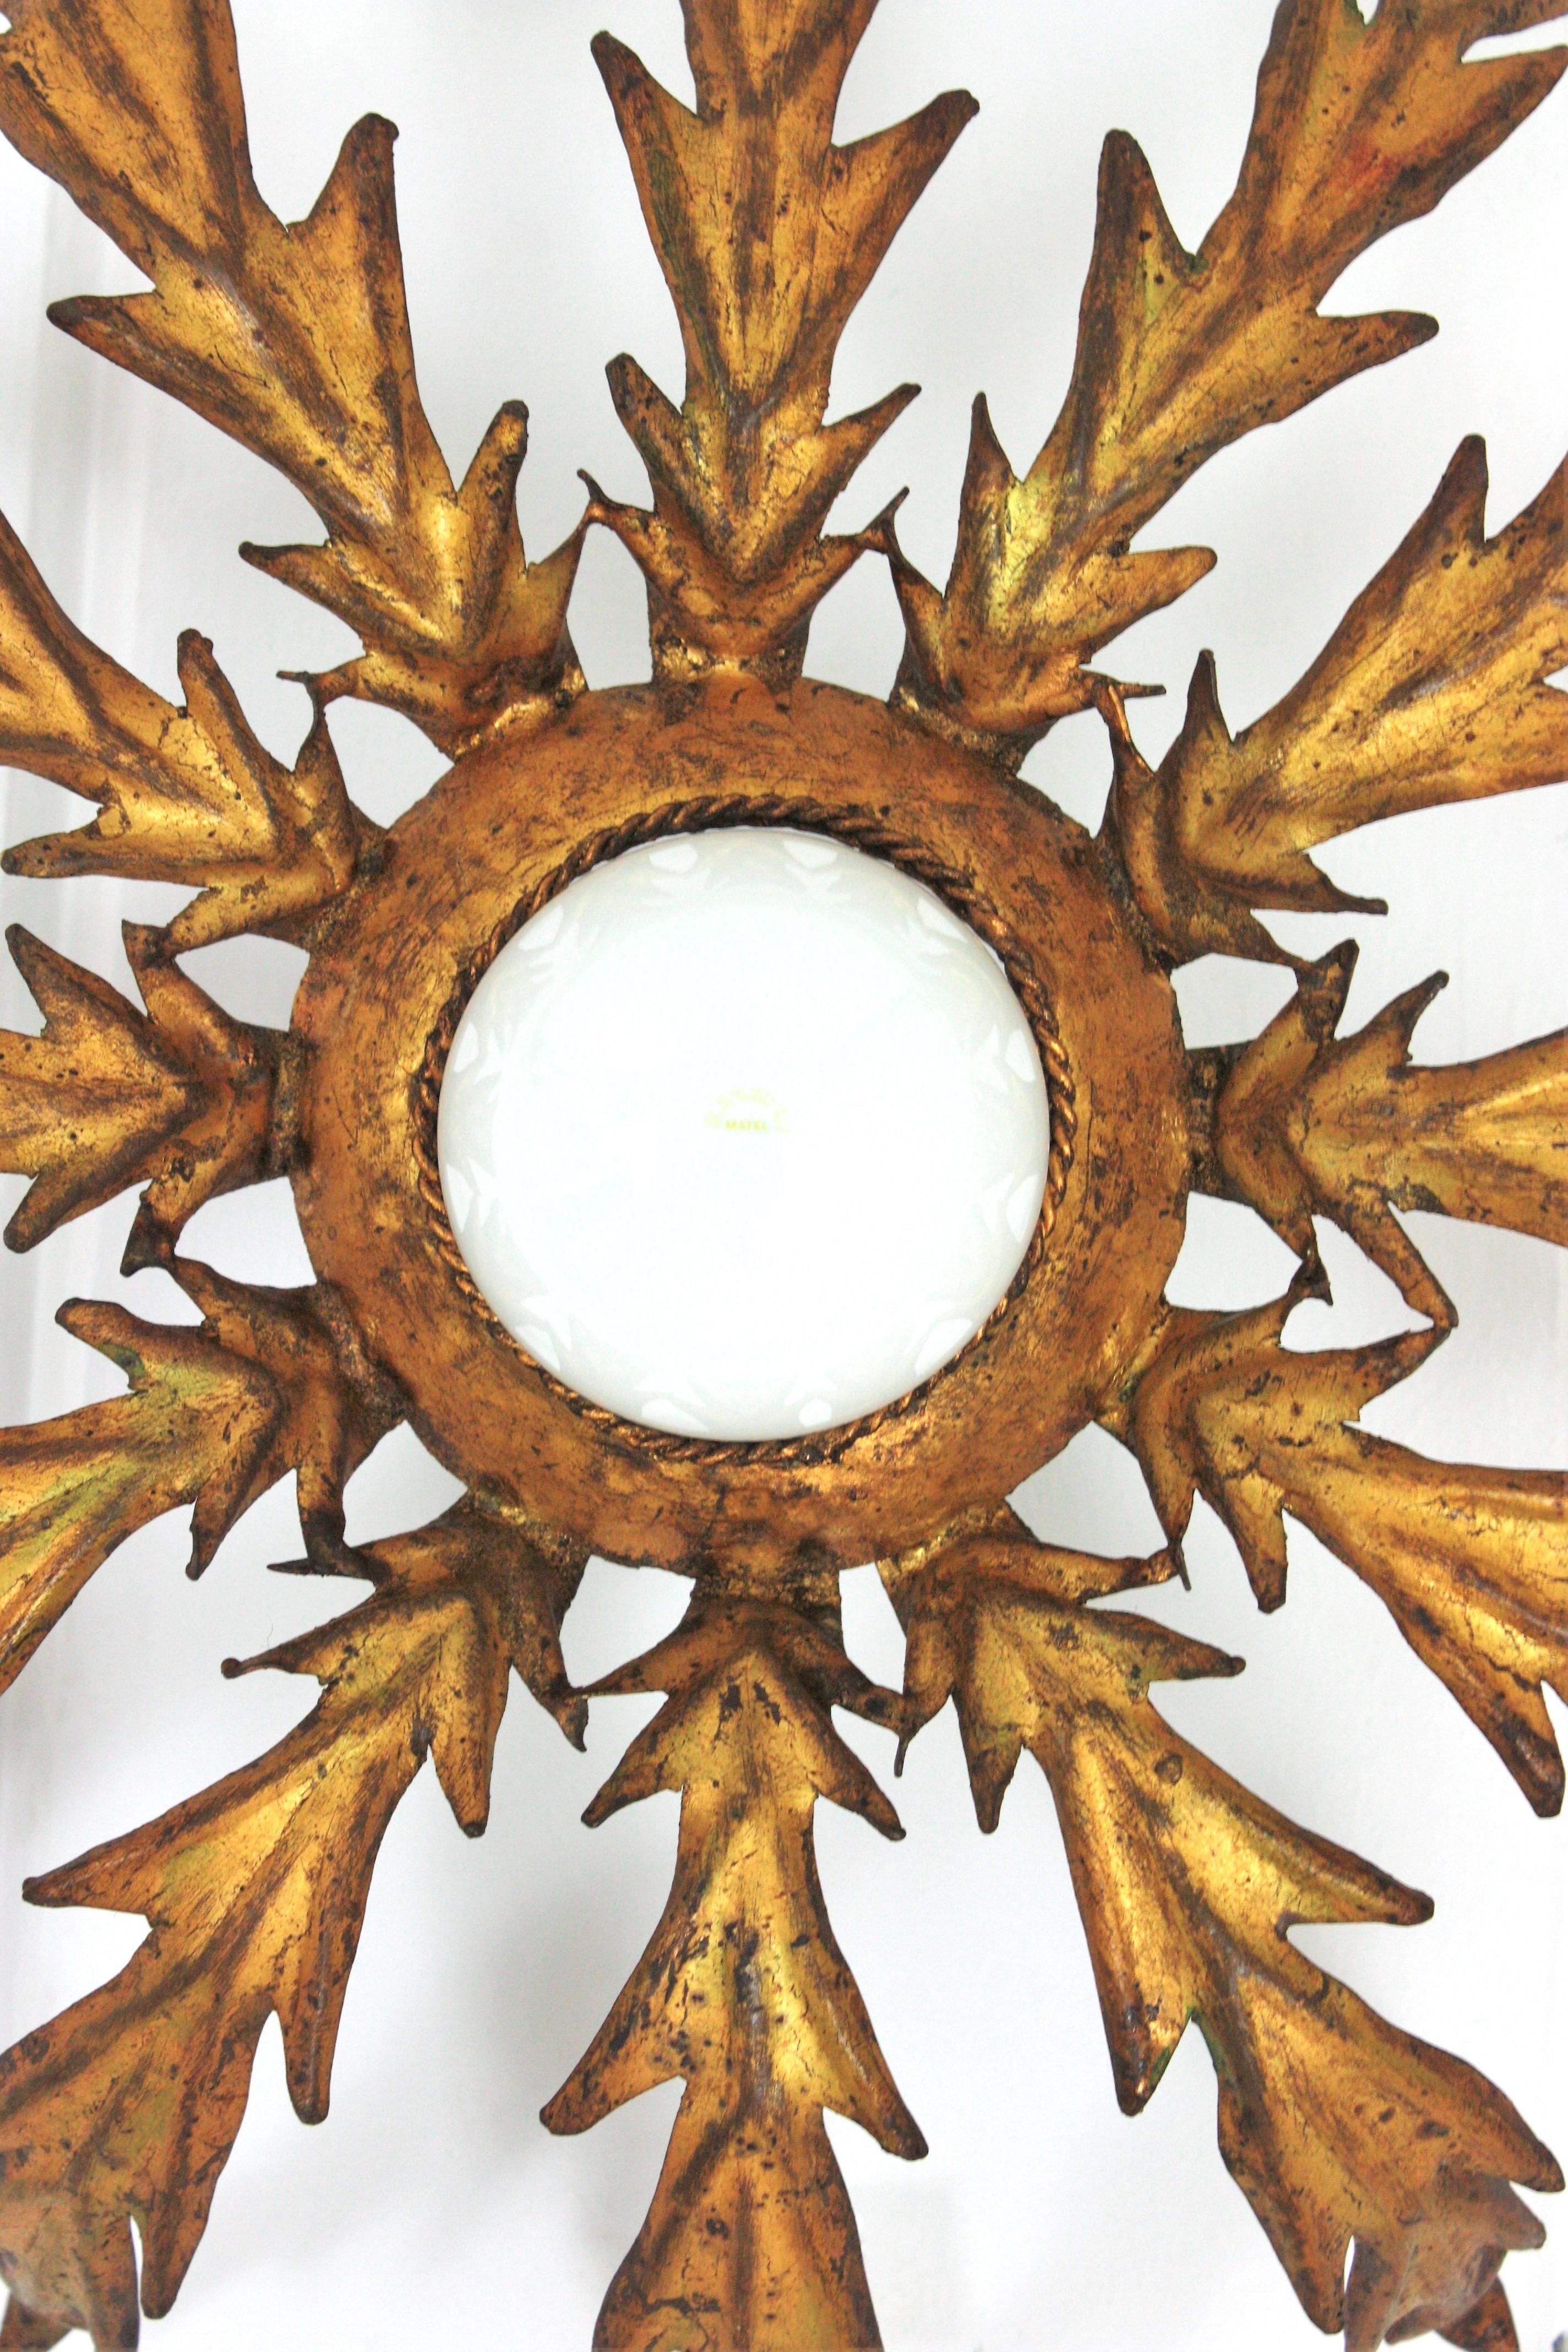 French Sunburst Leafed Ceiling Light Fixture in Gilt Iron, 1940s For Sale 2